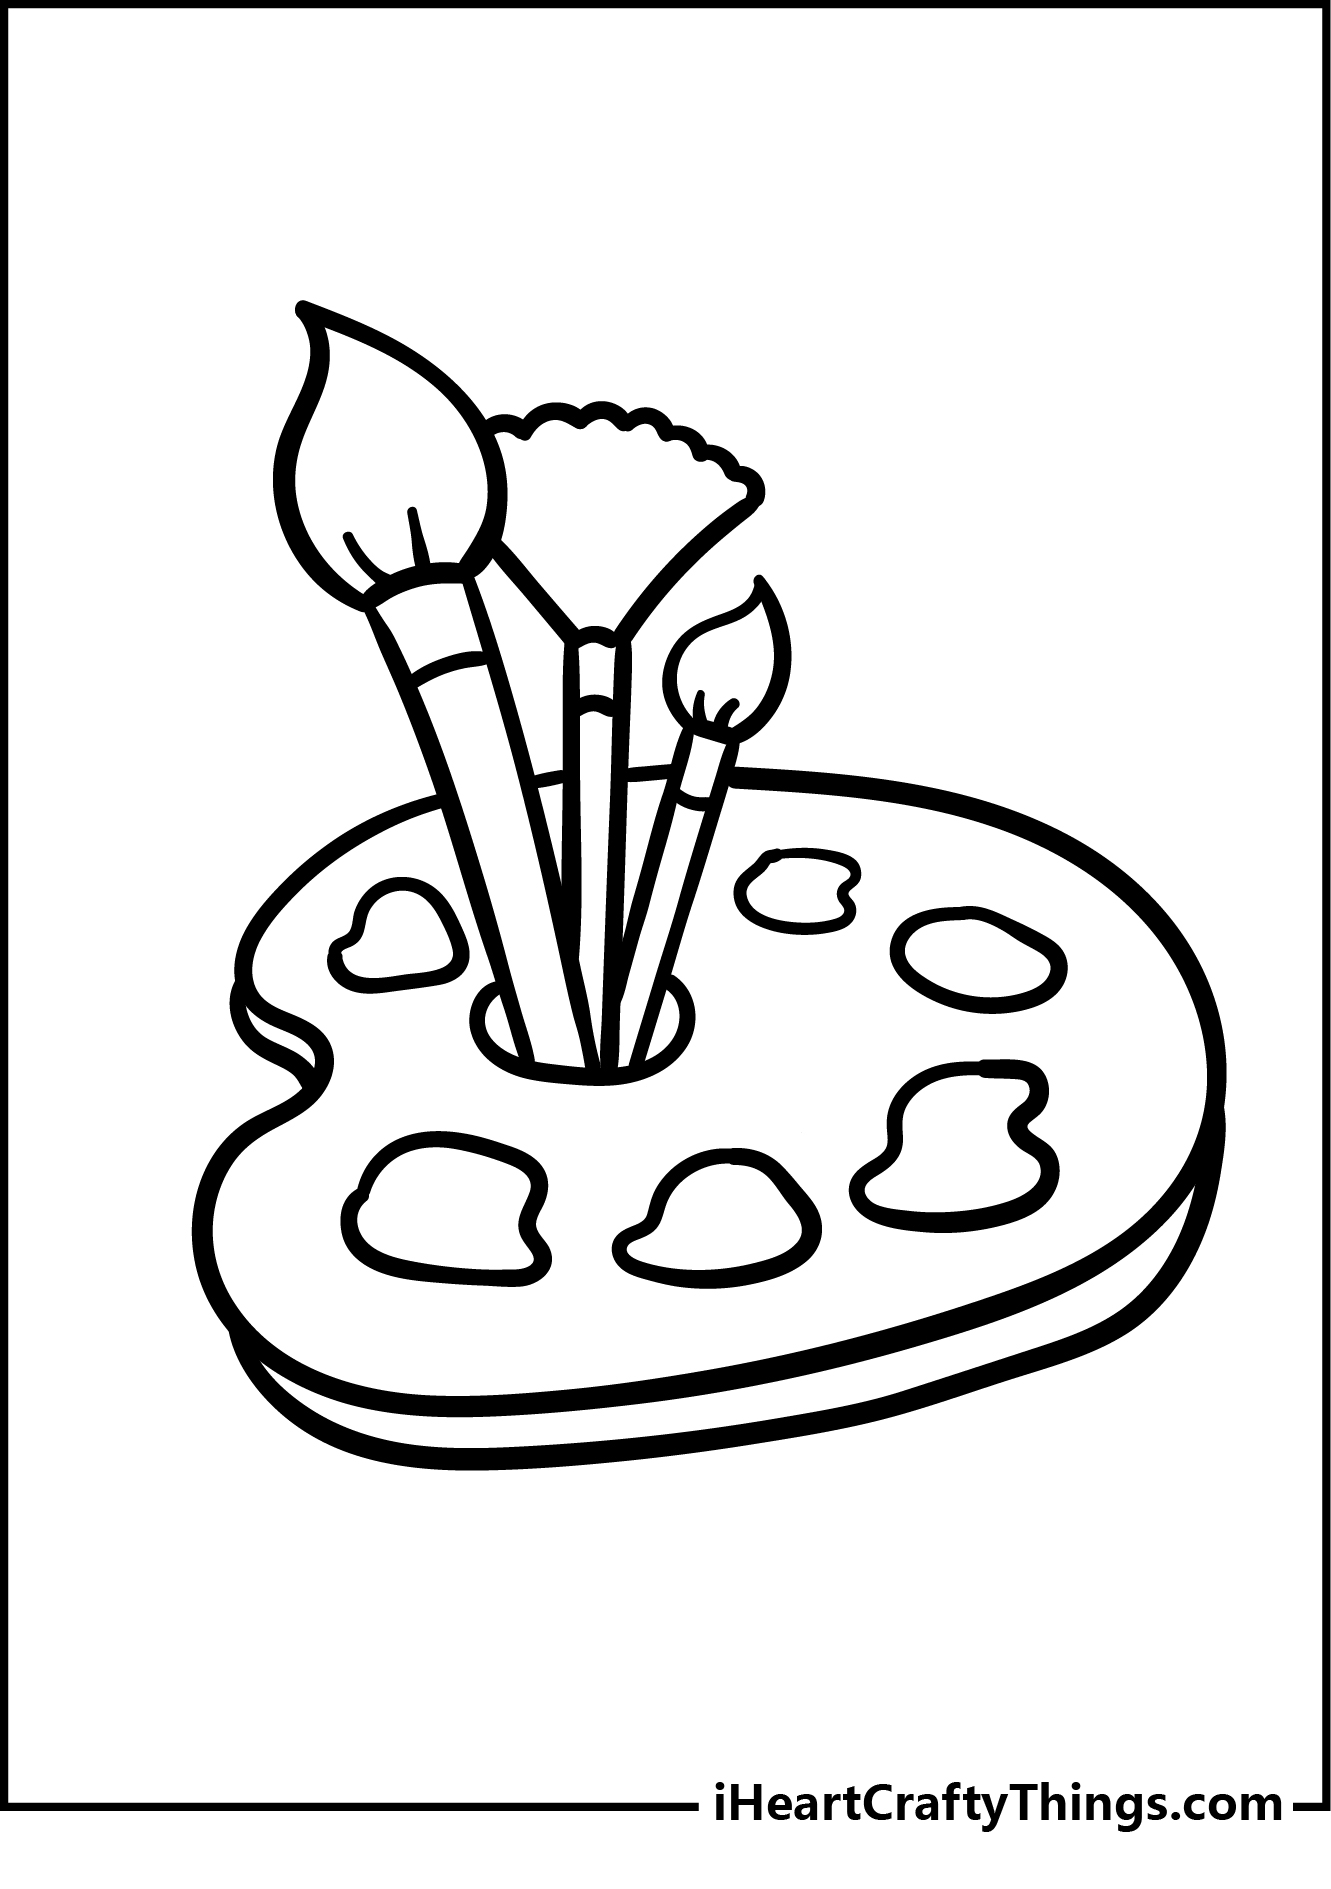 Painting Coloring Pages free pdf download